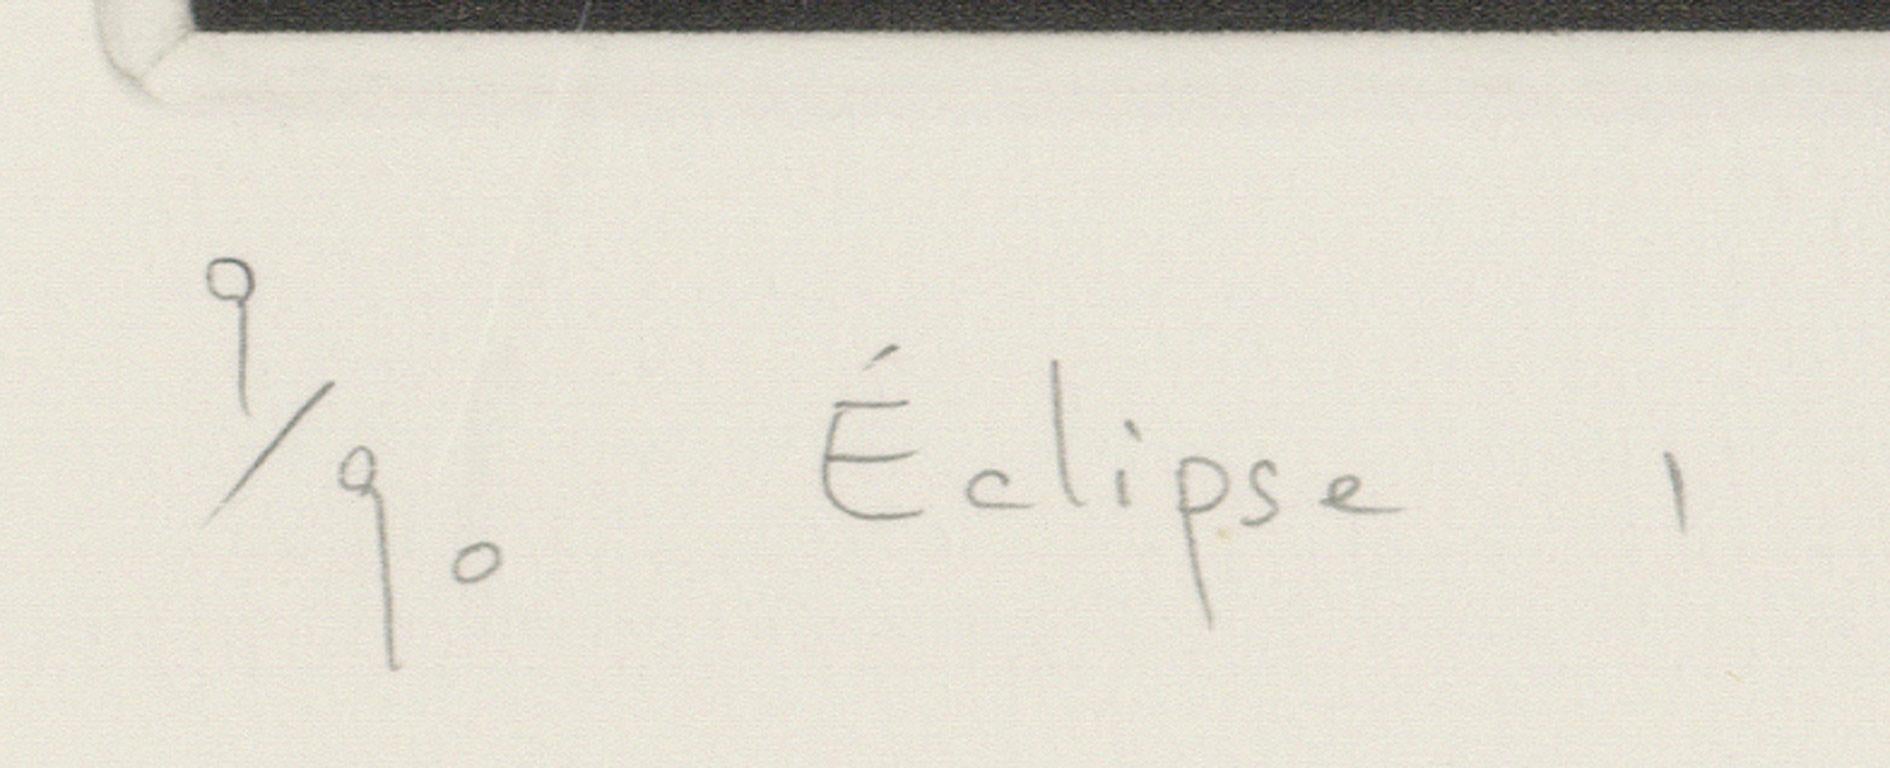 Eclipse I is  from an edition of 90

Mezzotint artist Mikio Watanabe was born in 1954 in Japan and currently lives in France. He is most known for his elegant, evocative black and white nudes. In these images the artist alternates between full